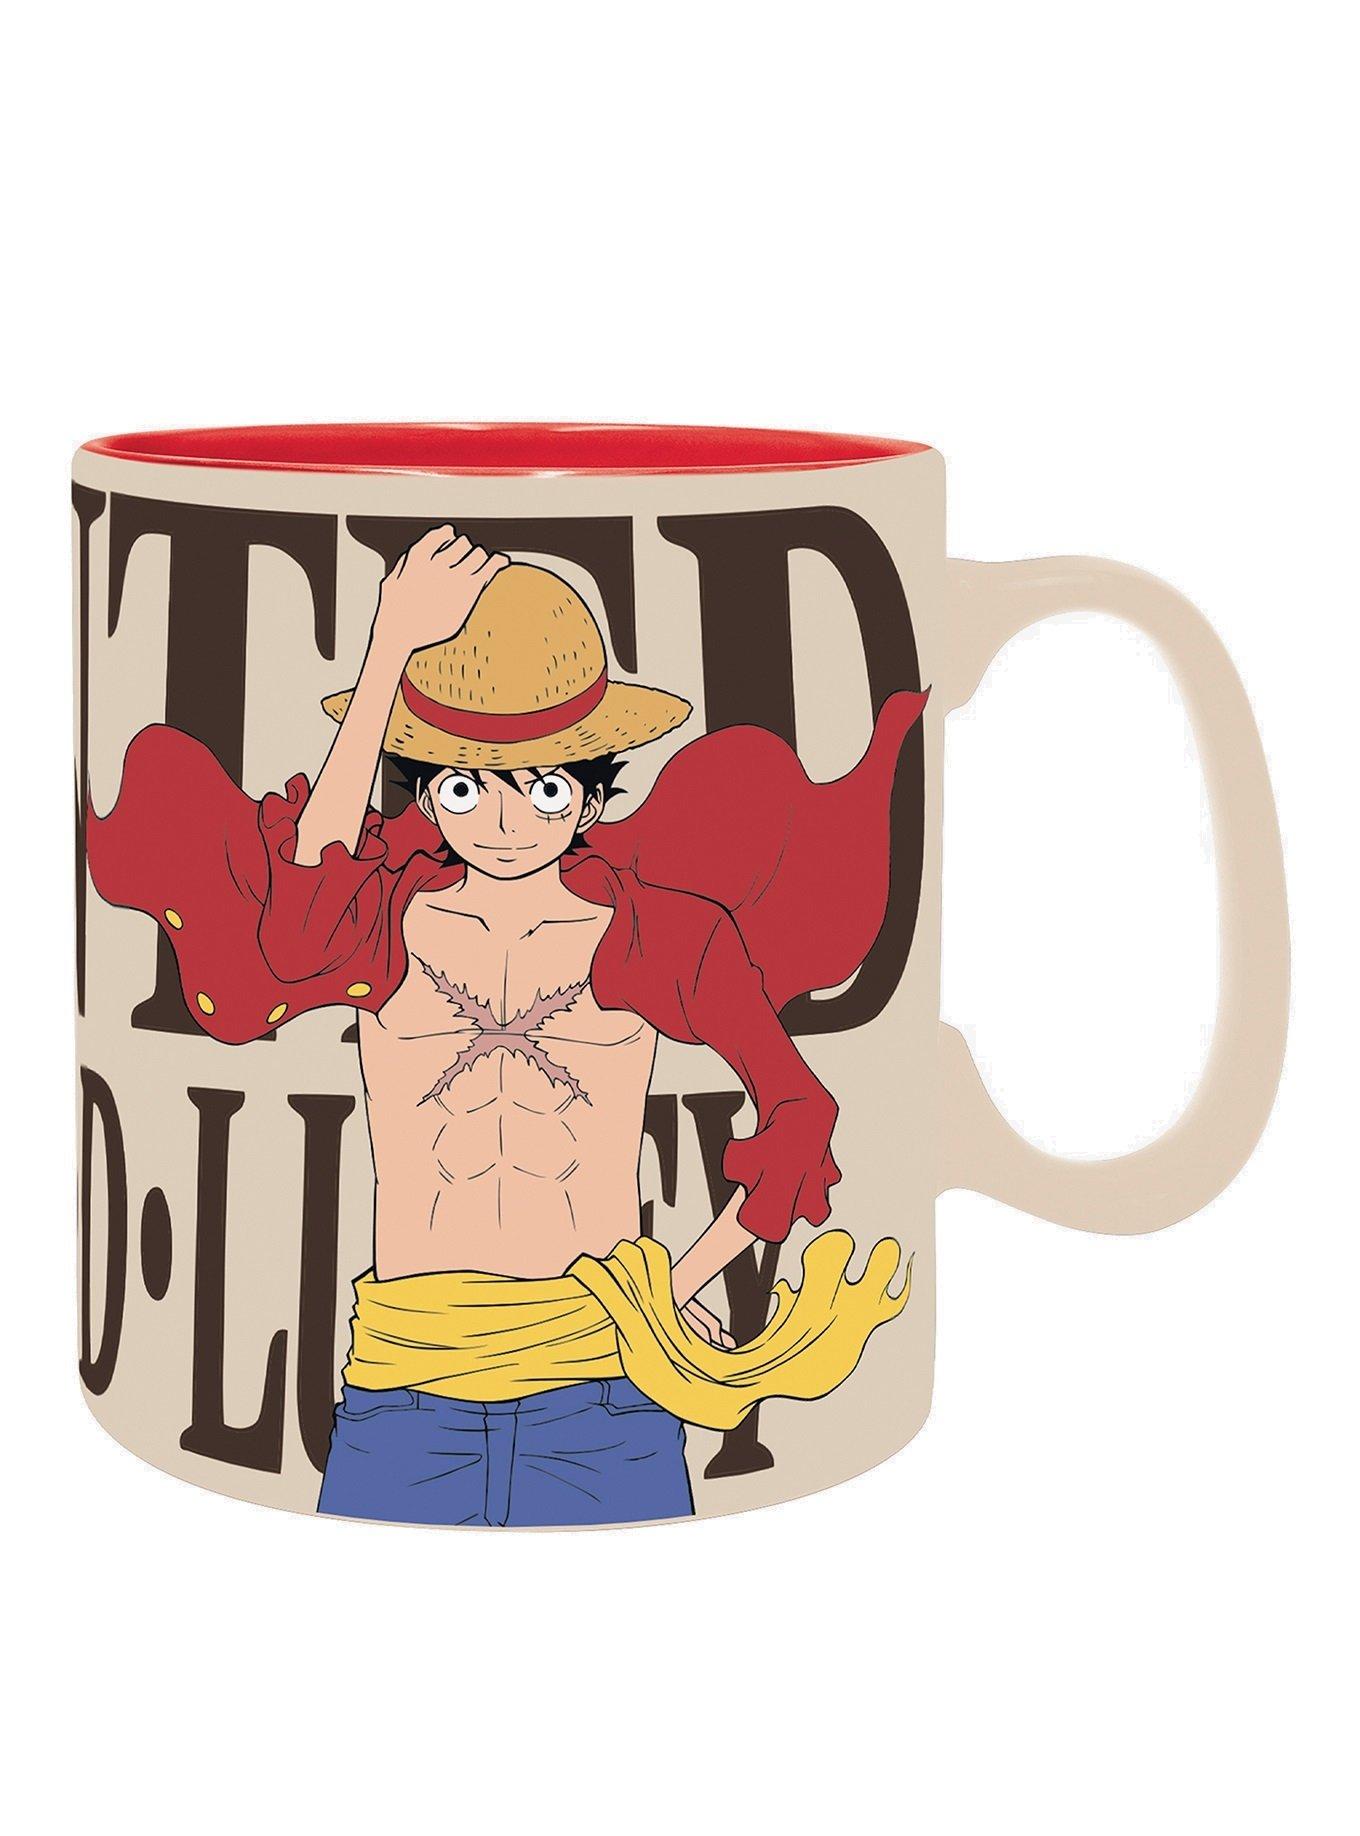 Official One Piece products and accessories by ABYstyle